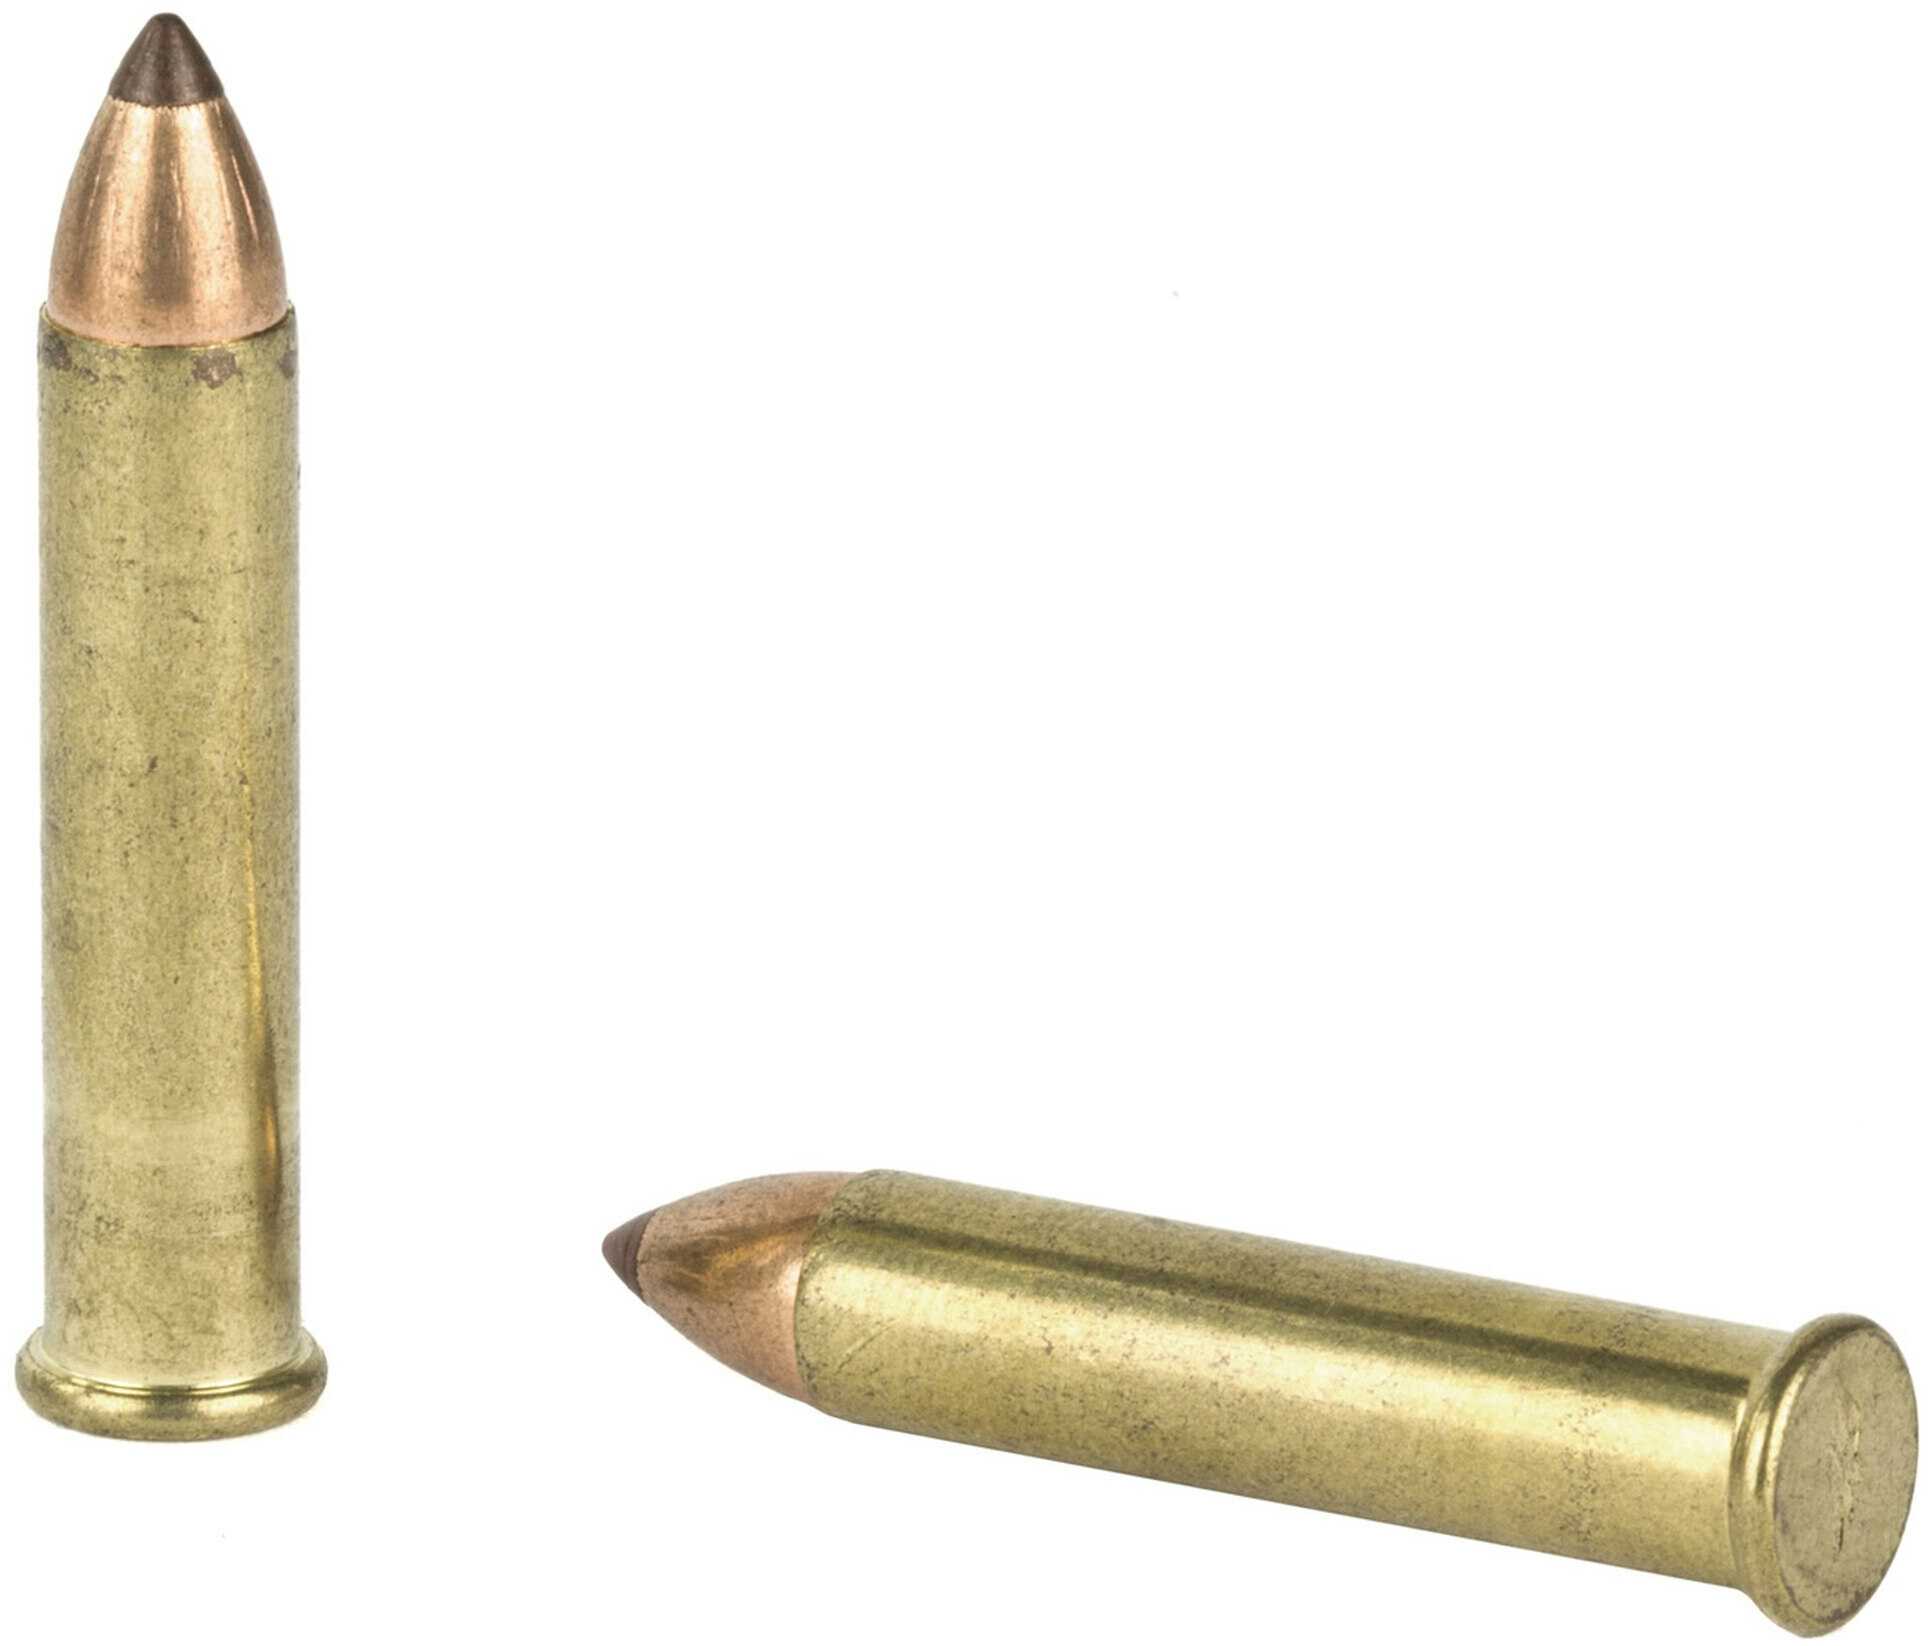 22 Win Mag Rimfire 25 Grain Hollow Point 50 Rounds Winchester Ammunition Magnum